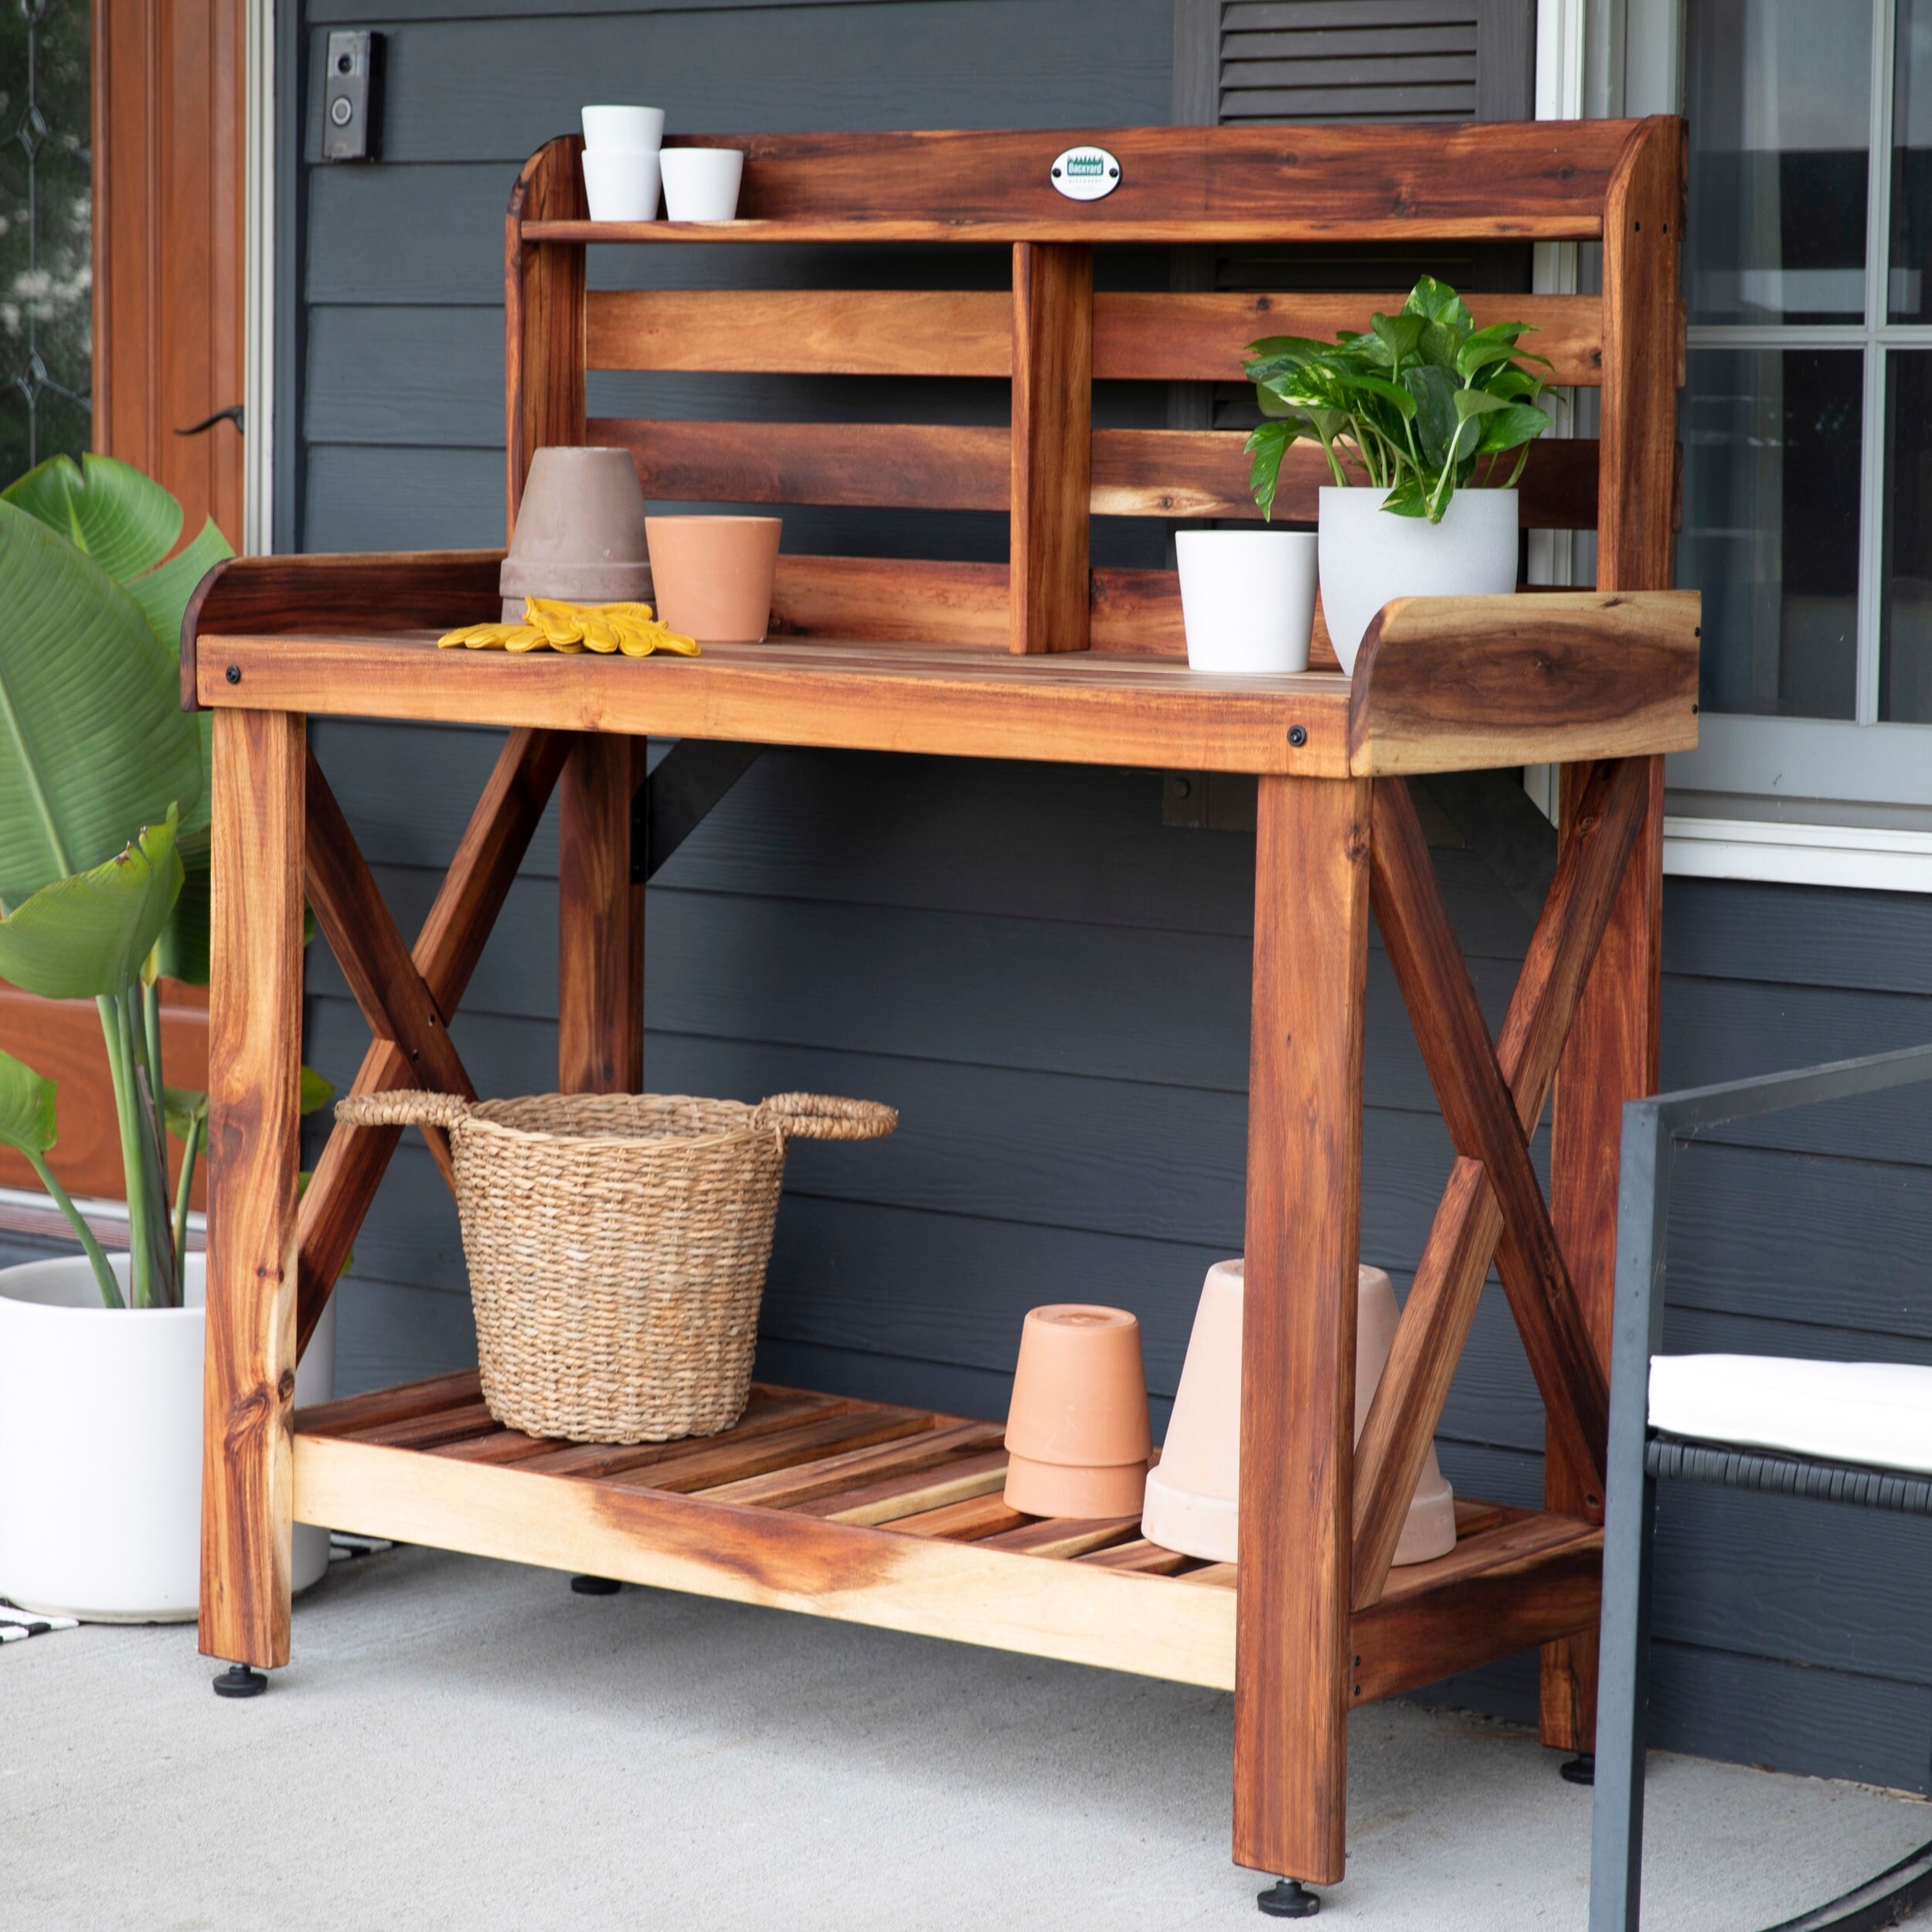 acacia wood potting bench with a bottom shelf, work station, and small top shelf